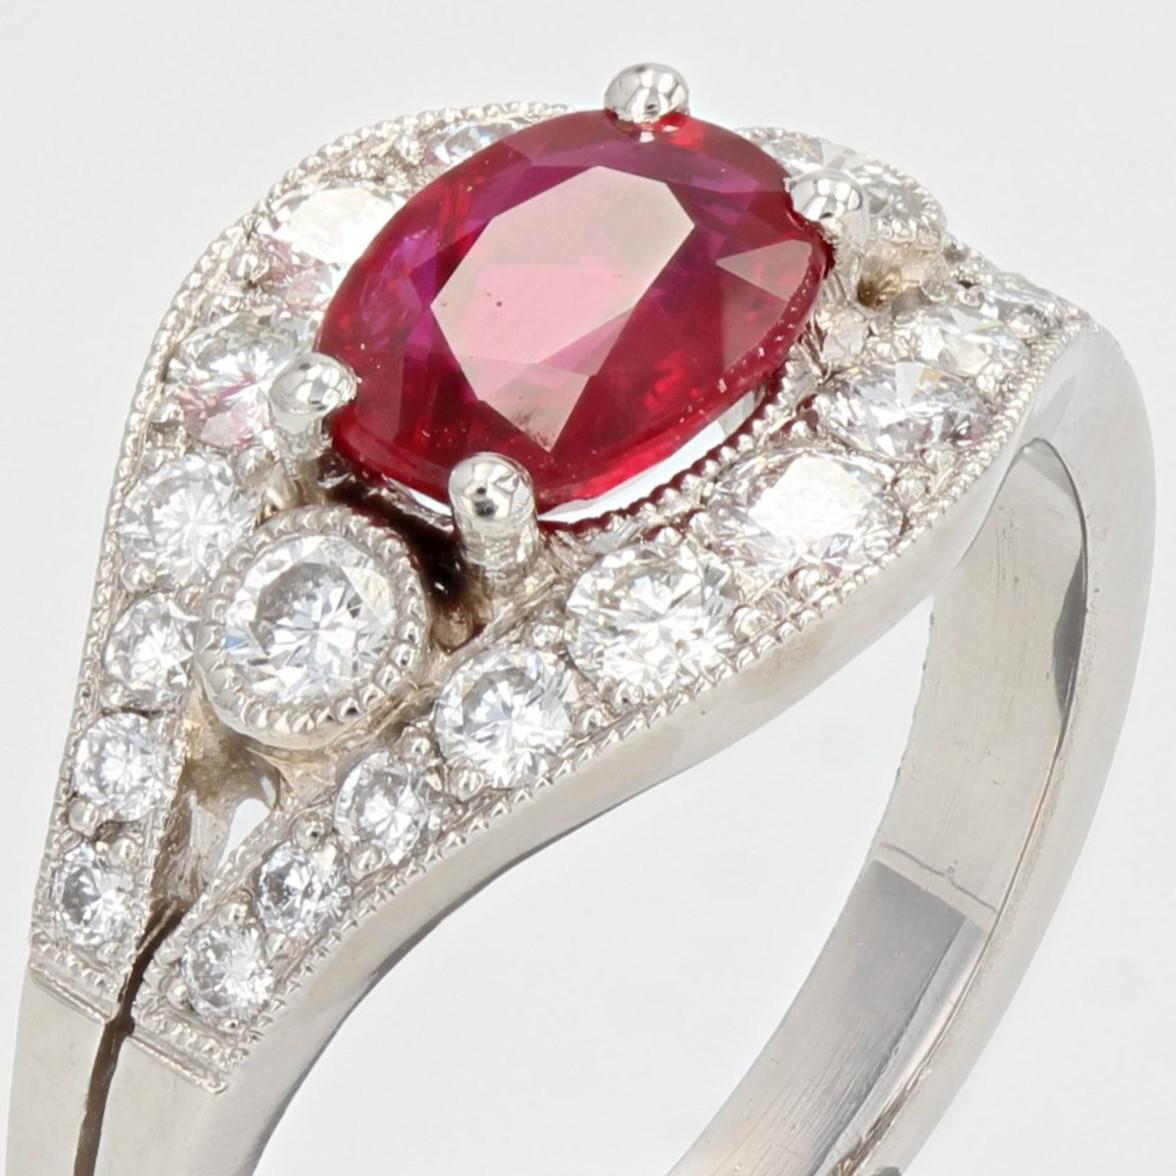 French Modern 1, 22 Carat Ruby Diamonds Platinum Ring For Sale 3